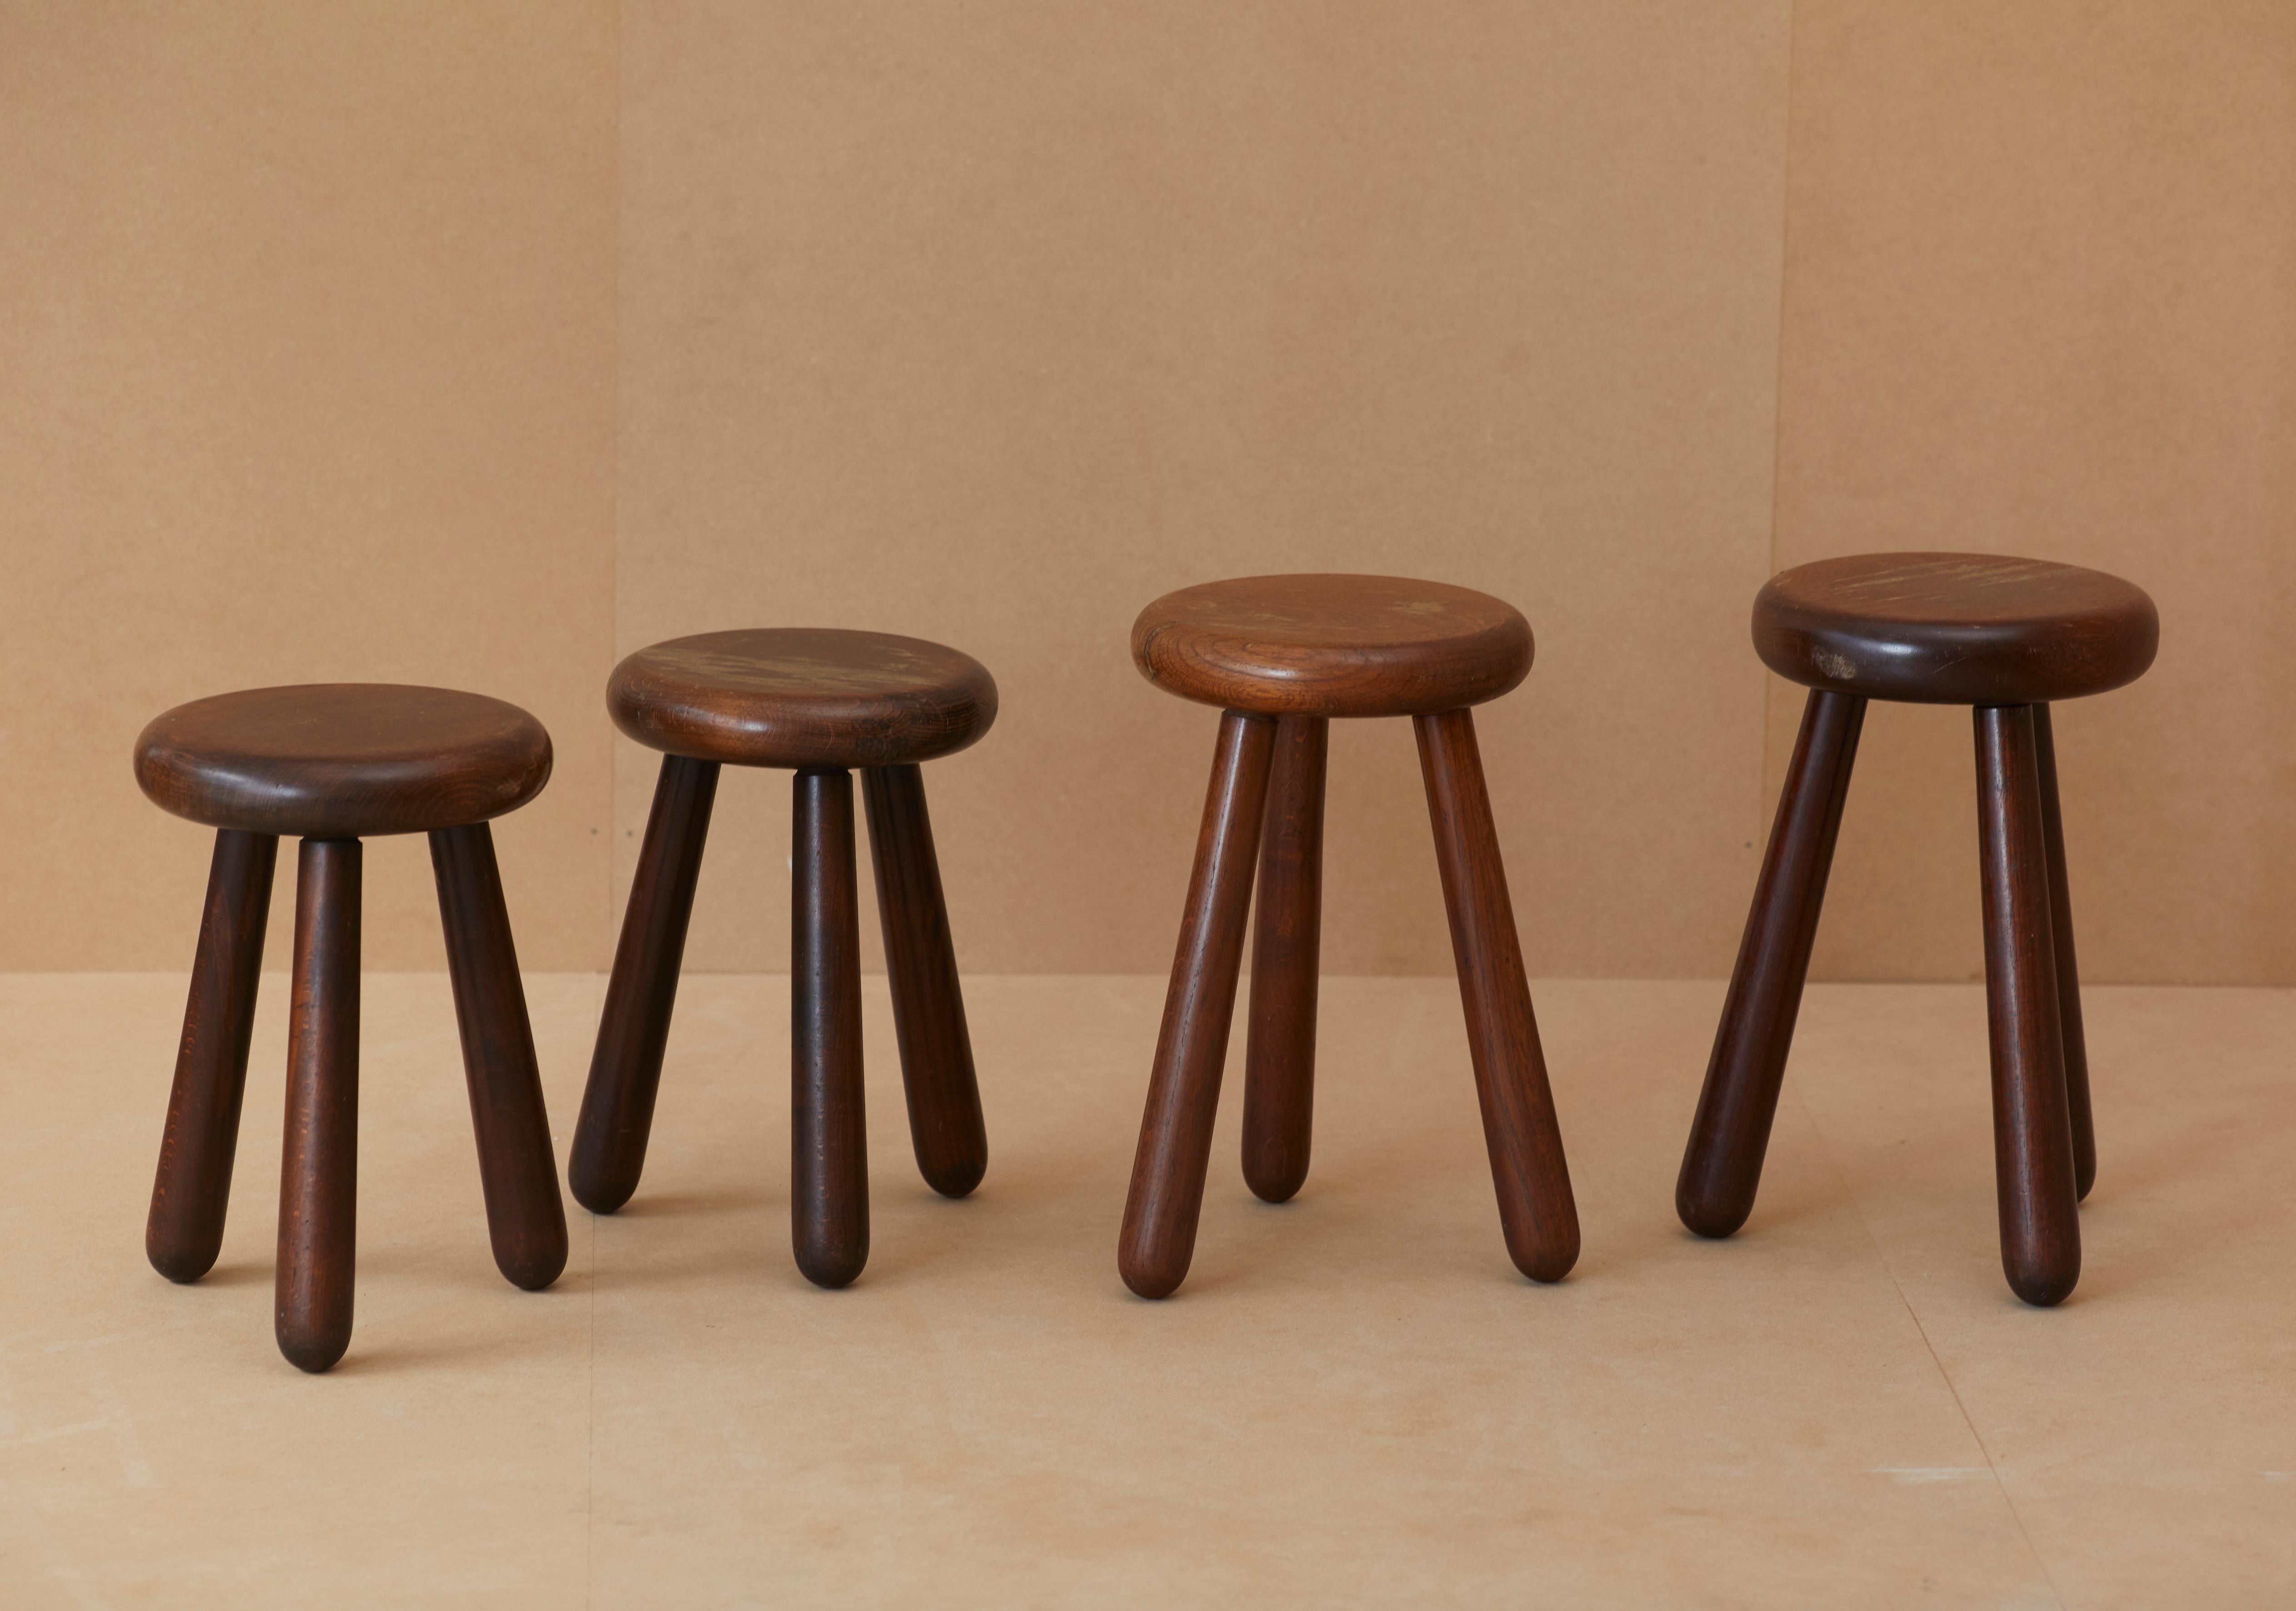 Set of (4) heavy, handcrafted, solid wood stools with dovetail joinery details. France, circa 1970.

The tallest stool is made of solid oak and the three others are made of solid beech. 

They were acquired from their maker, Leon, a 91-year old